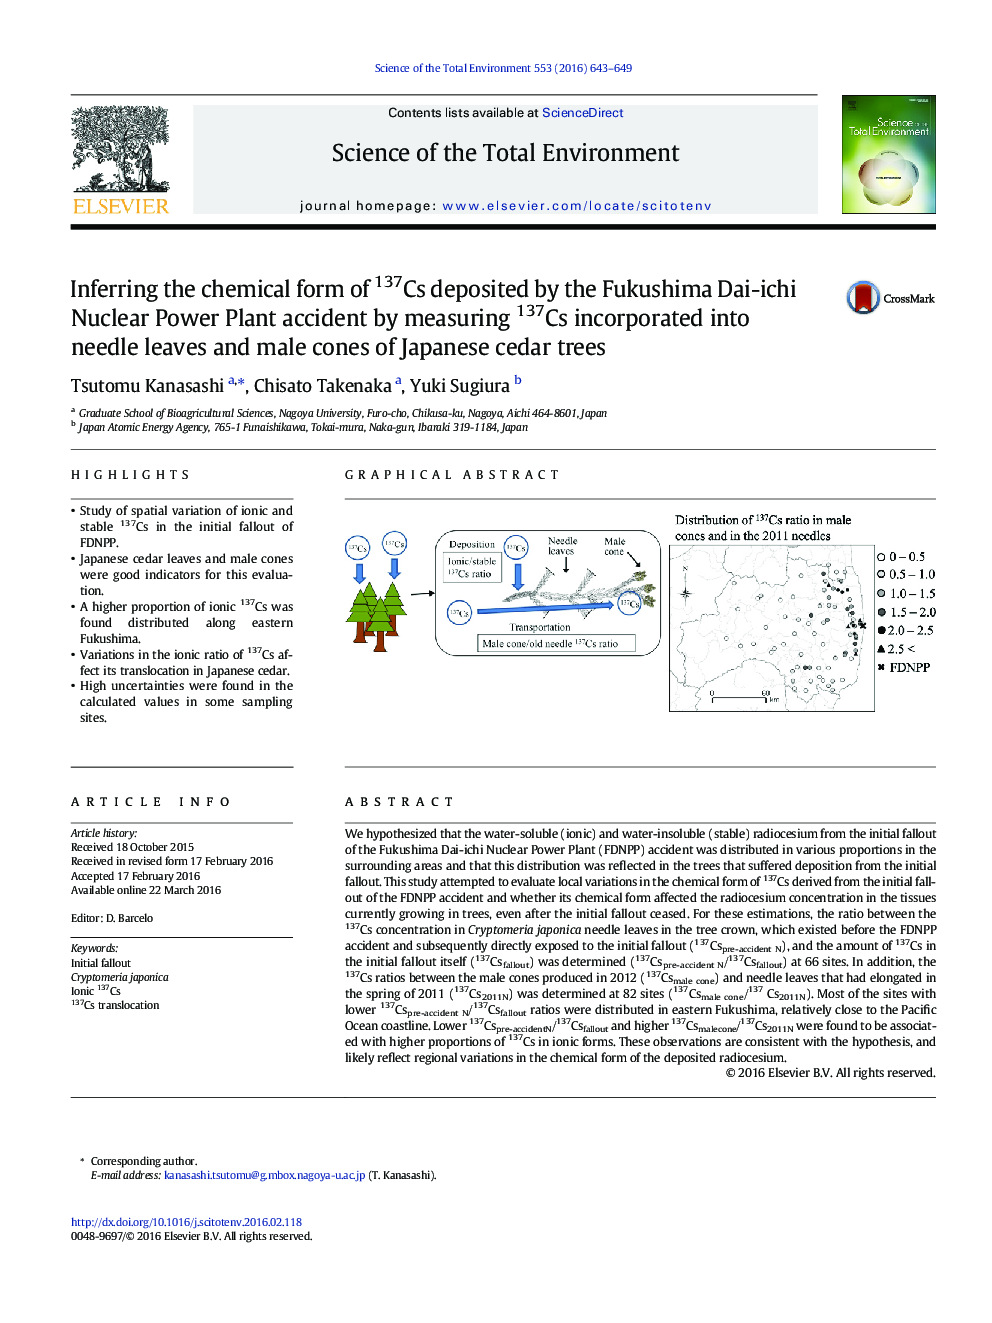 Inferring the chemical form of 137Cs deposited by the Fukushima Dai-ichi Nuclear Power Plant accident by measuring 137Cs incorporated into needle leaves and male cones of Japanese cedar trees